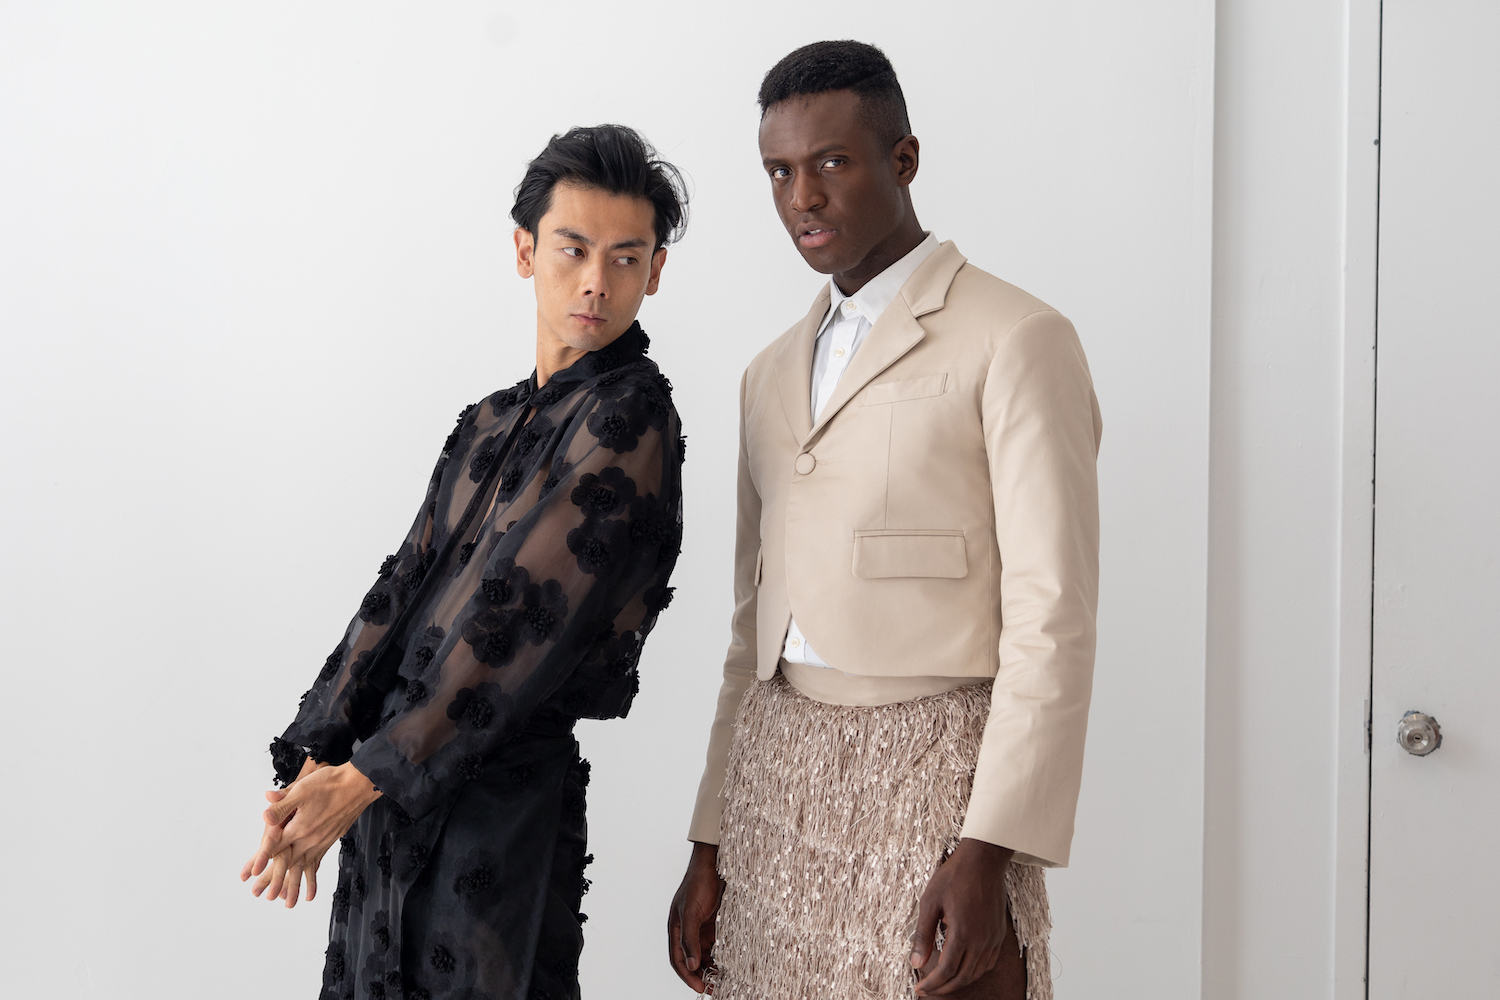 Two models pose together near a wall of the showroom. One model is wearing a black mesh top, and the other model is wearing a cream blazer. The models are wearing clothes from TERRY SINGH.